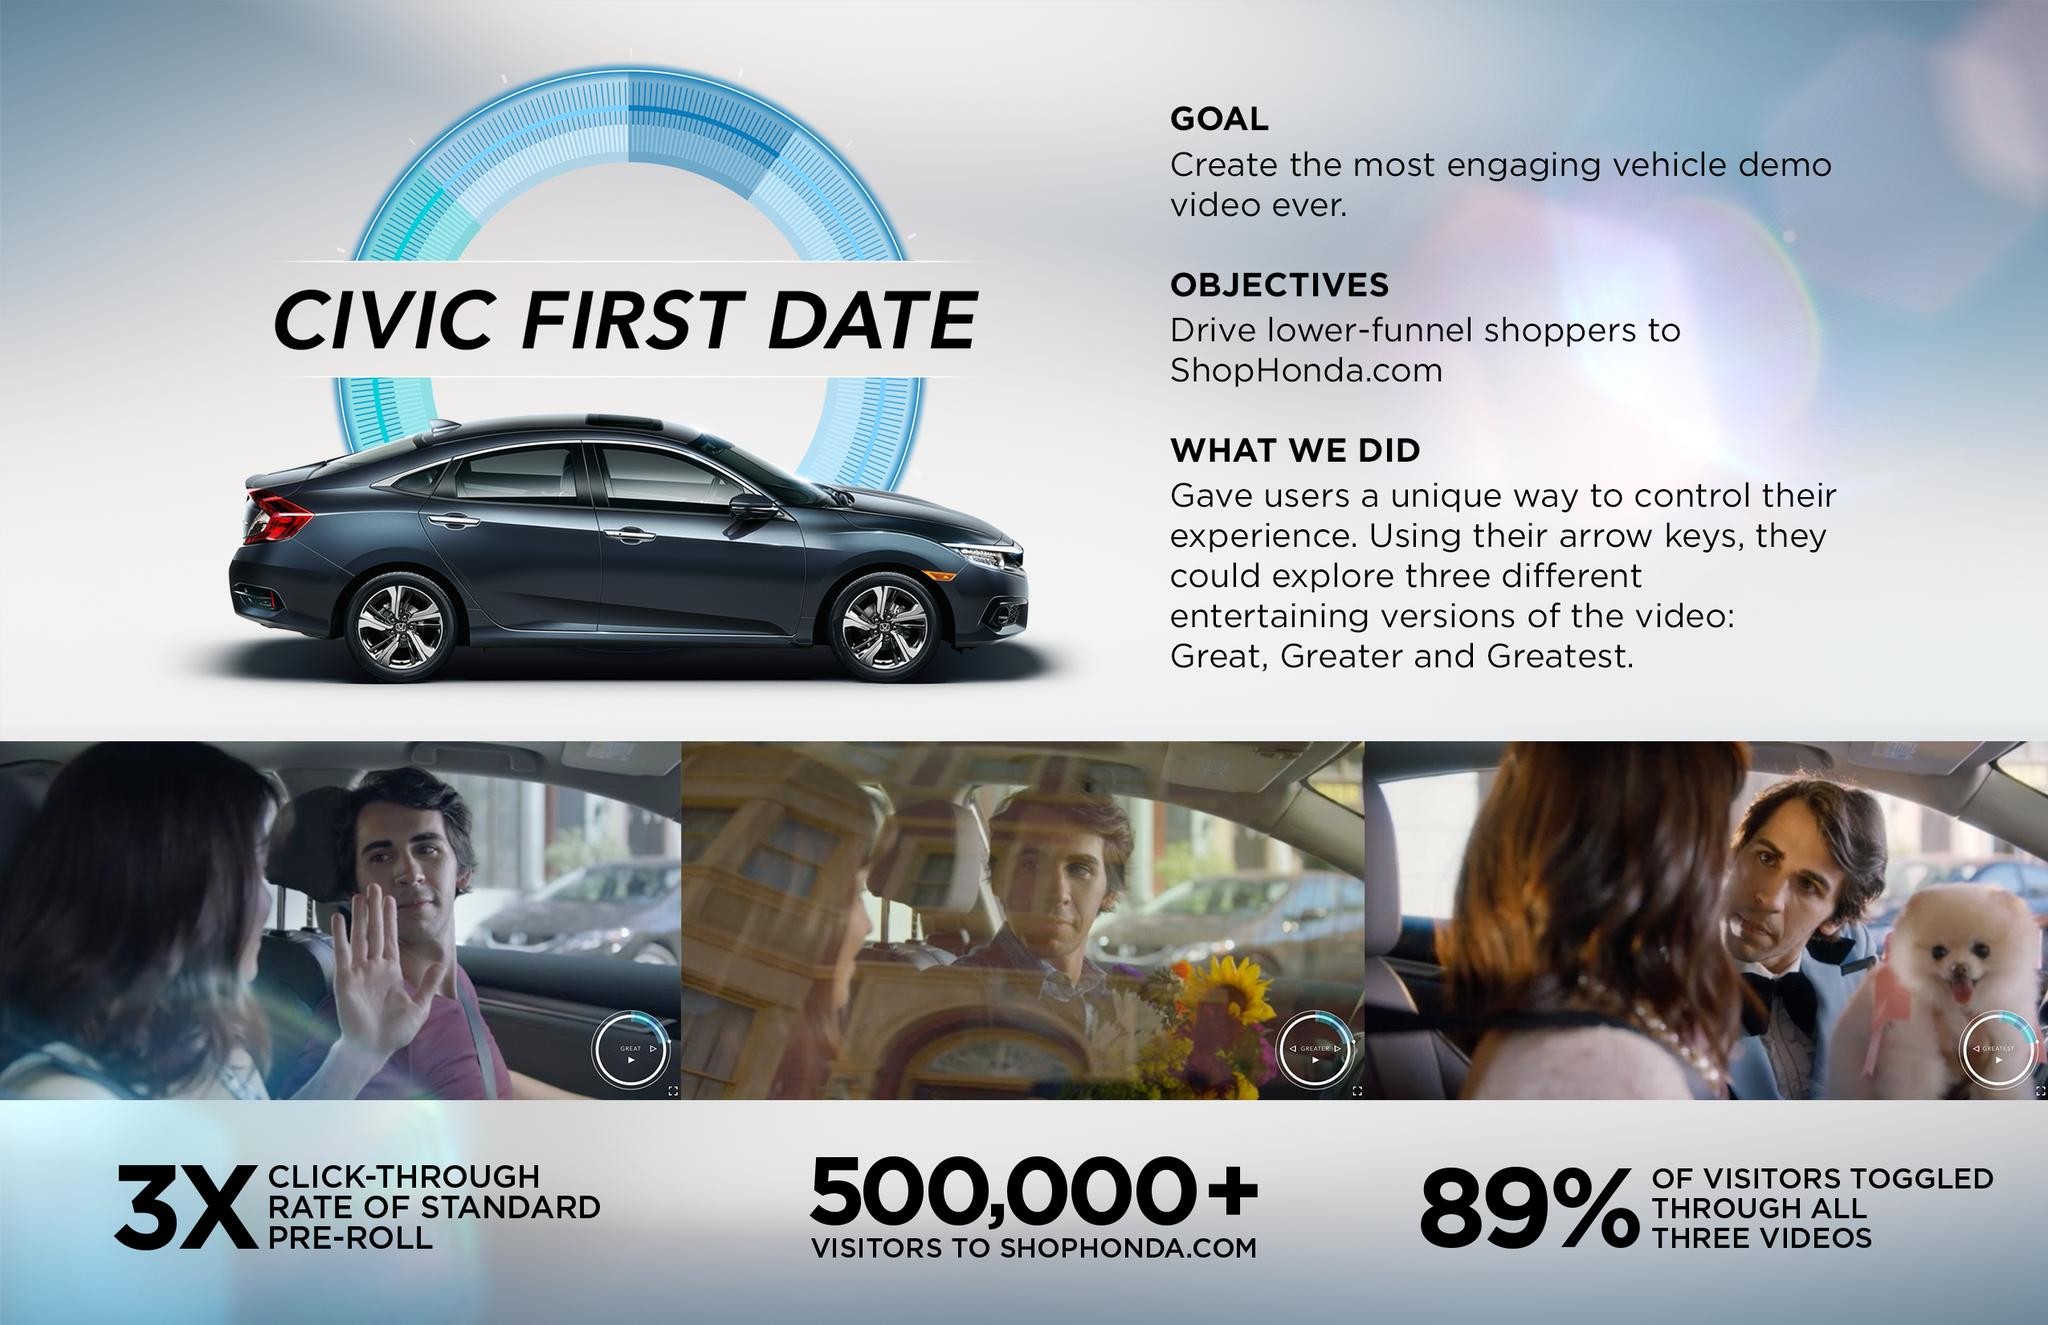 Civic "First Date"